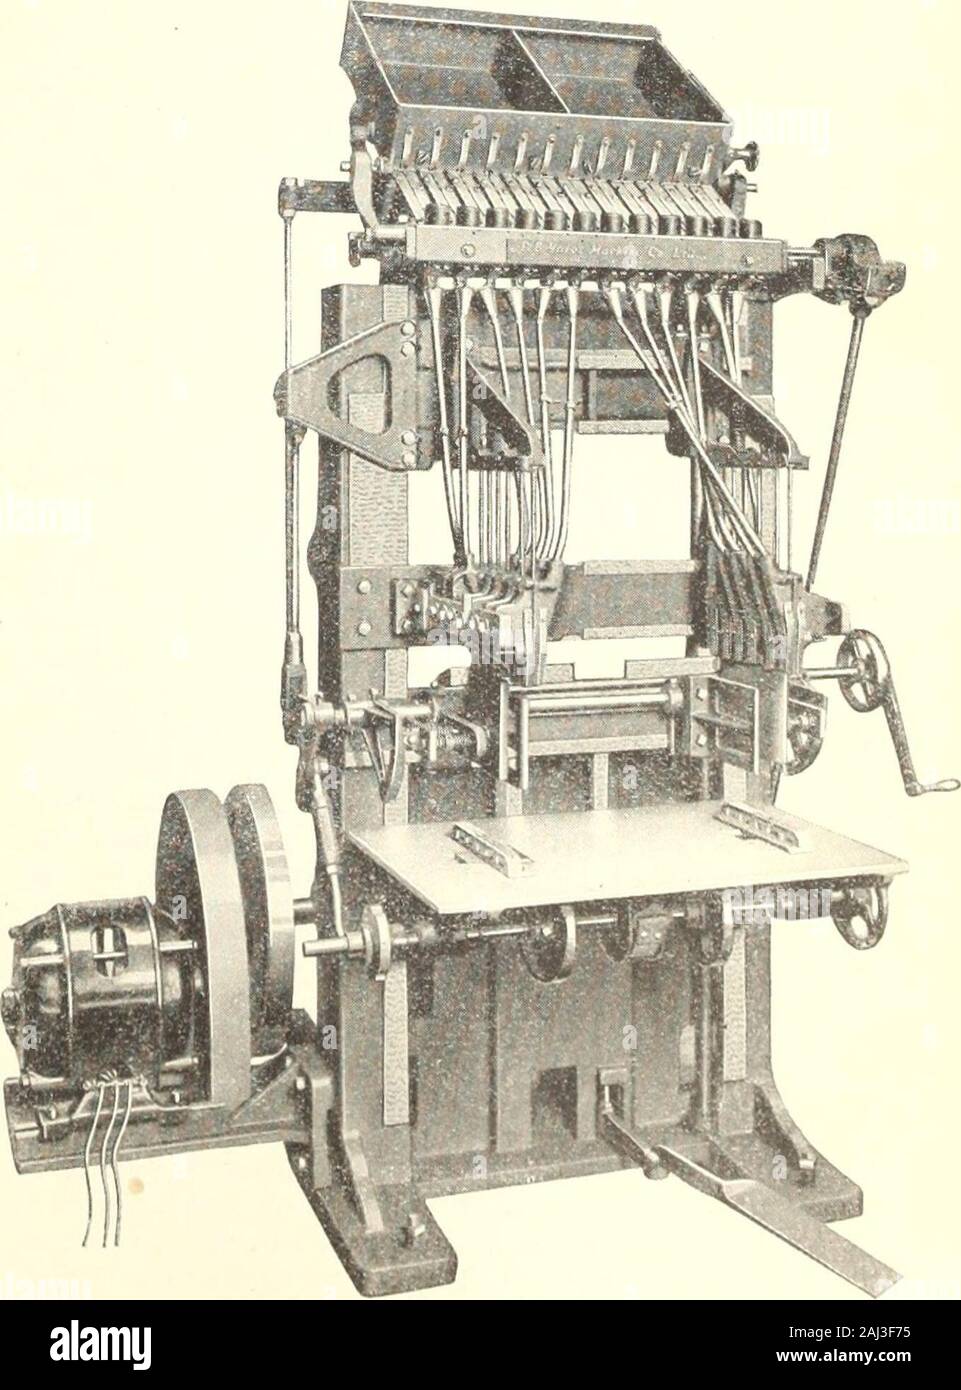 Canadian wood products industries . shed. The machine may lie obtained and fitted for beltor motor drive. In the latter case the usual driveconsists of locating a 3 h.p., 1,200 r.p.m. motor on abracket in place of the tight and loose pulleys, andcoupling same to the drive shaft which carries thepulleys to the spindle, the fan and the power feed me-chanism. Where 2 or 3 phase, 220 or 440 volt, 60cycle current is available a motor-on-arbor type ofmachine may be employed. In this the countershaftand idle pulleys are eliminated entirely and the ma-chine is driven by two motors, one a ly? h.p., 3,0 Stock Photo